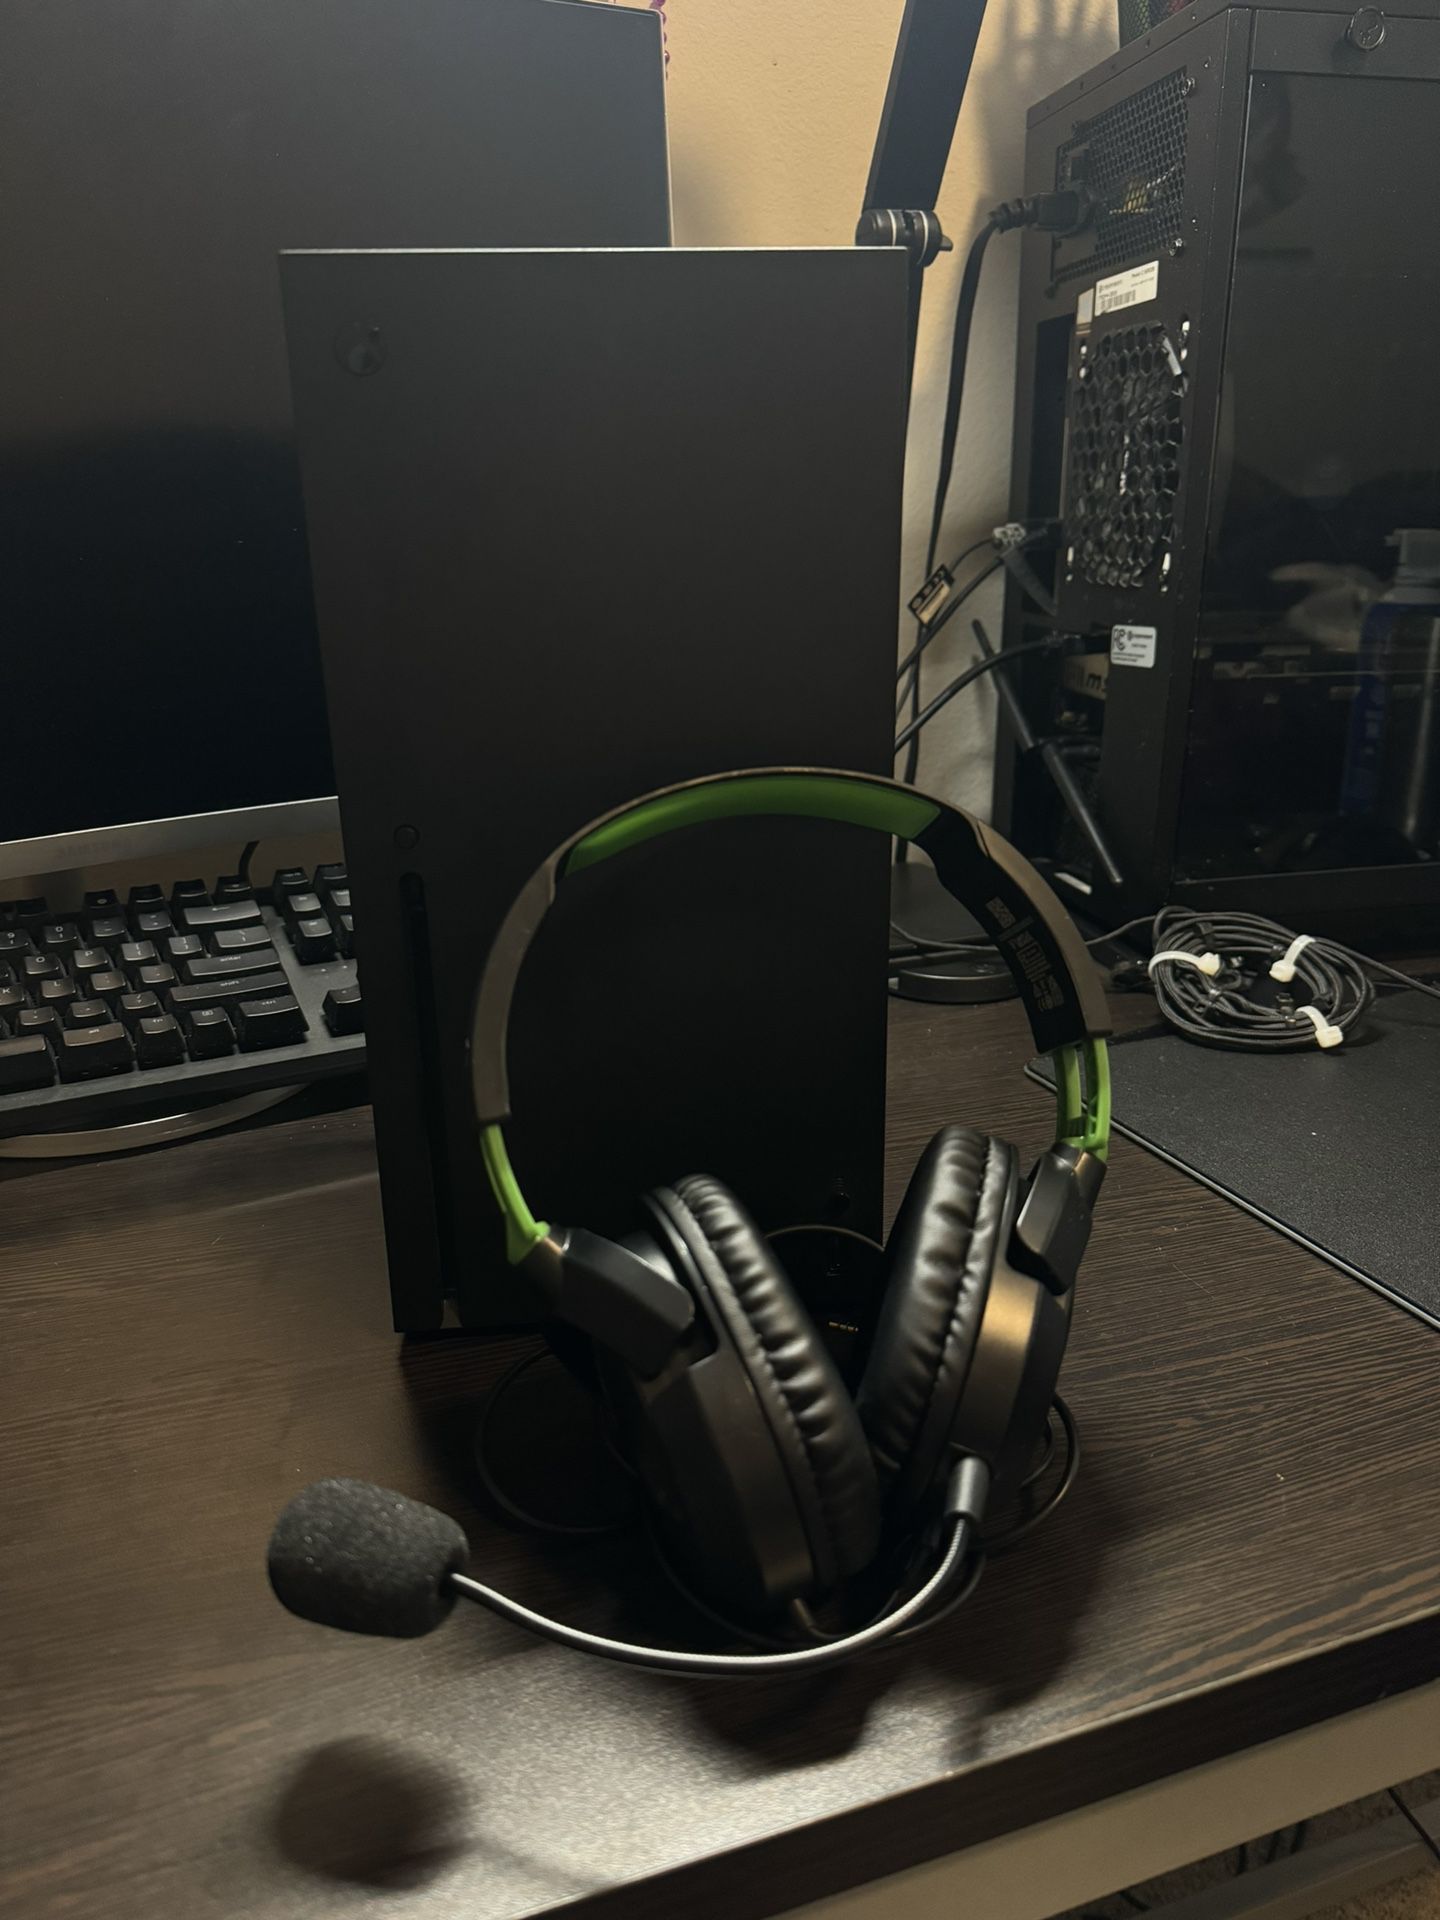 Xbox Series X w/ Matching controller And Extra Turtle Beach Recon Headset